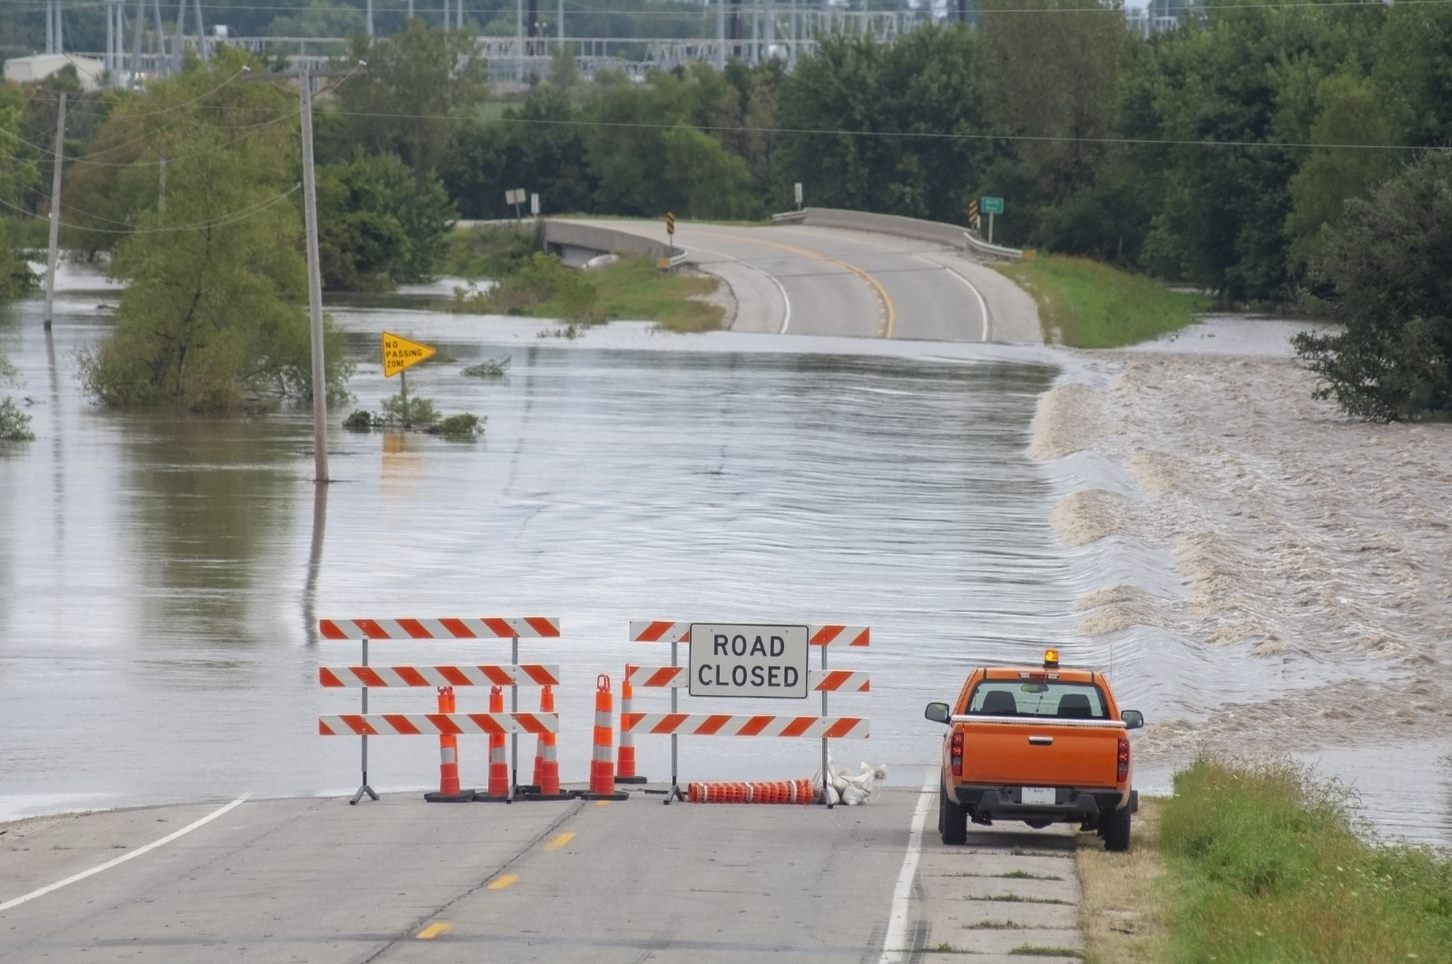 Road closed due to flooding